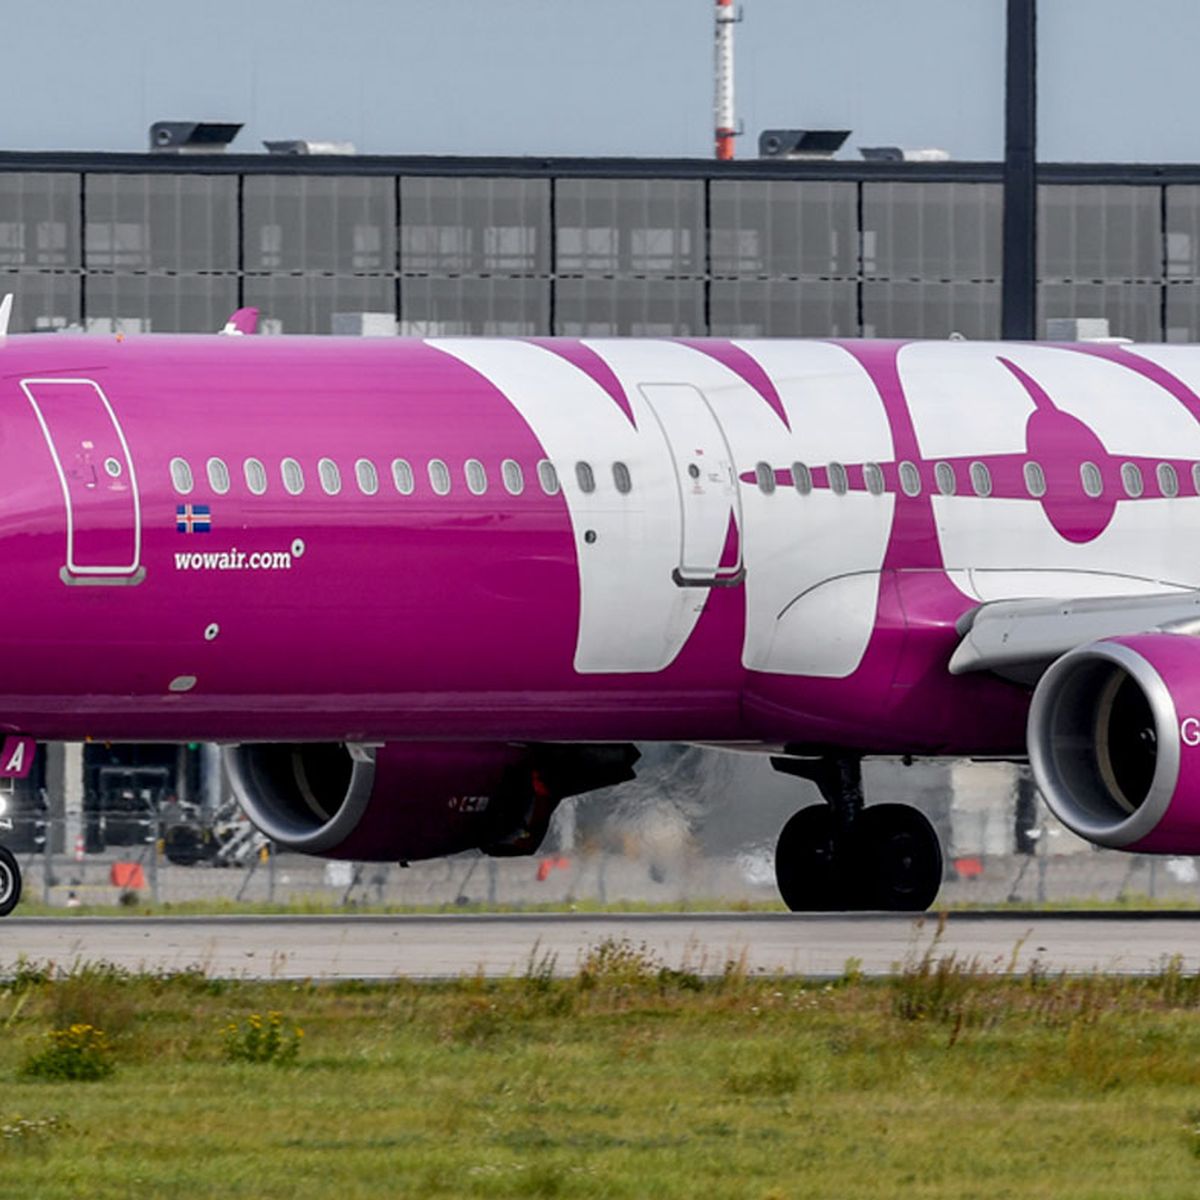 Wow Air, an Icelandic Budget Airline, Suspends Service - The New